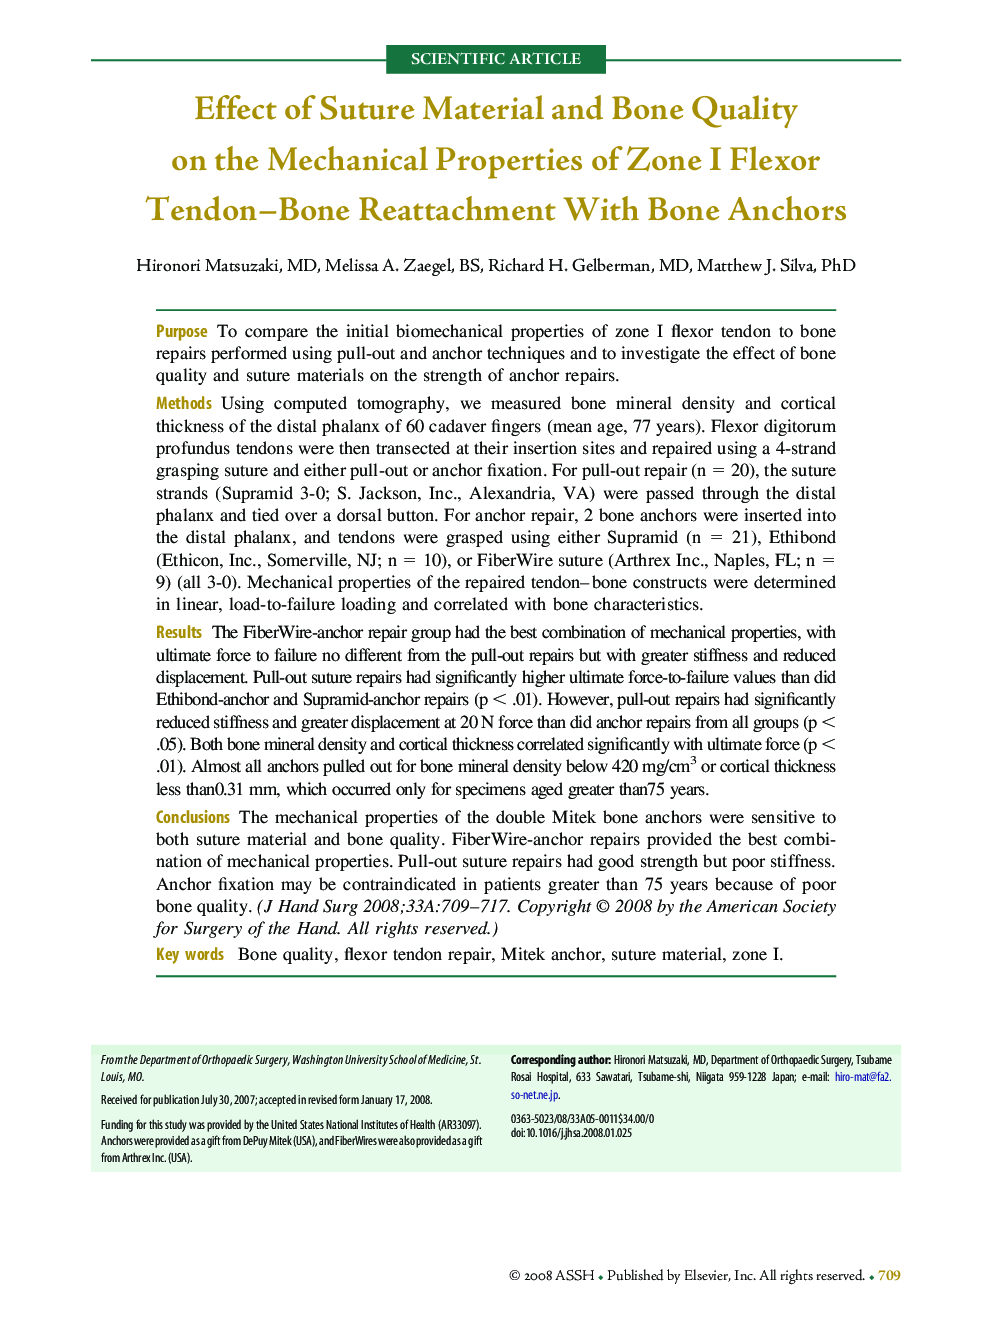 Effect of Suture Material and Bone Quality on the Mechanical Properties of Zone I Flexor Tendon–Bone Reattachment With Bone Anchors 